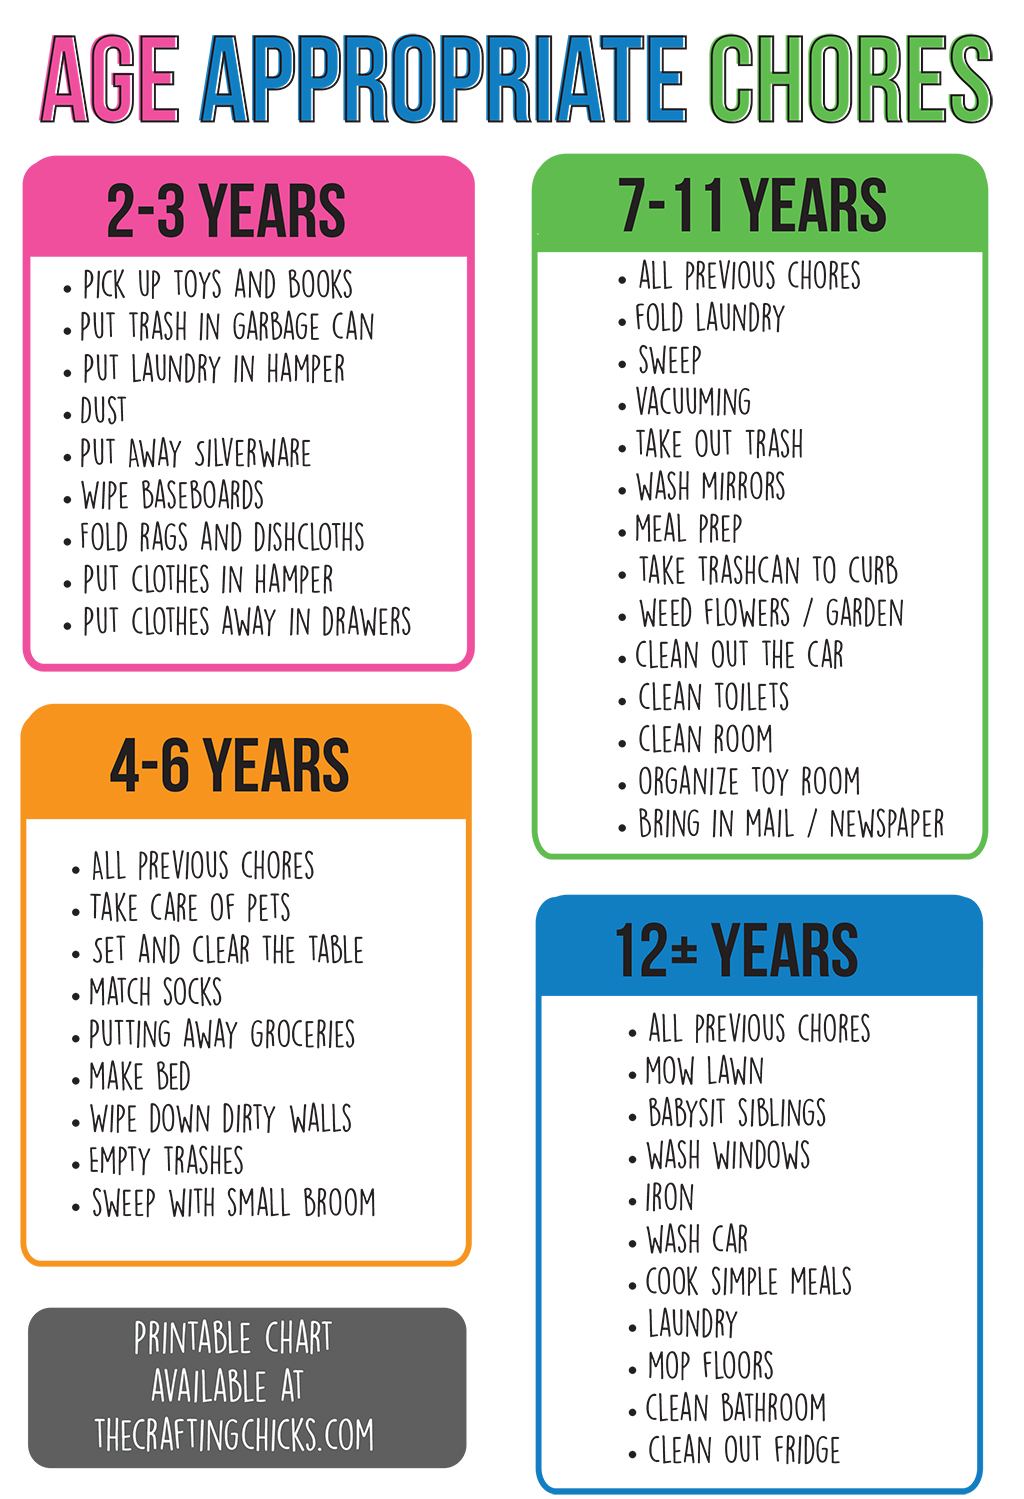 Age appropriate chore printable - Chores your kids can do, at different ages!